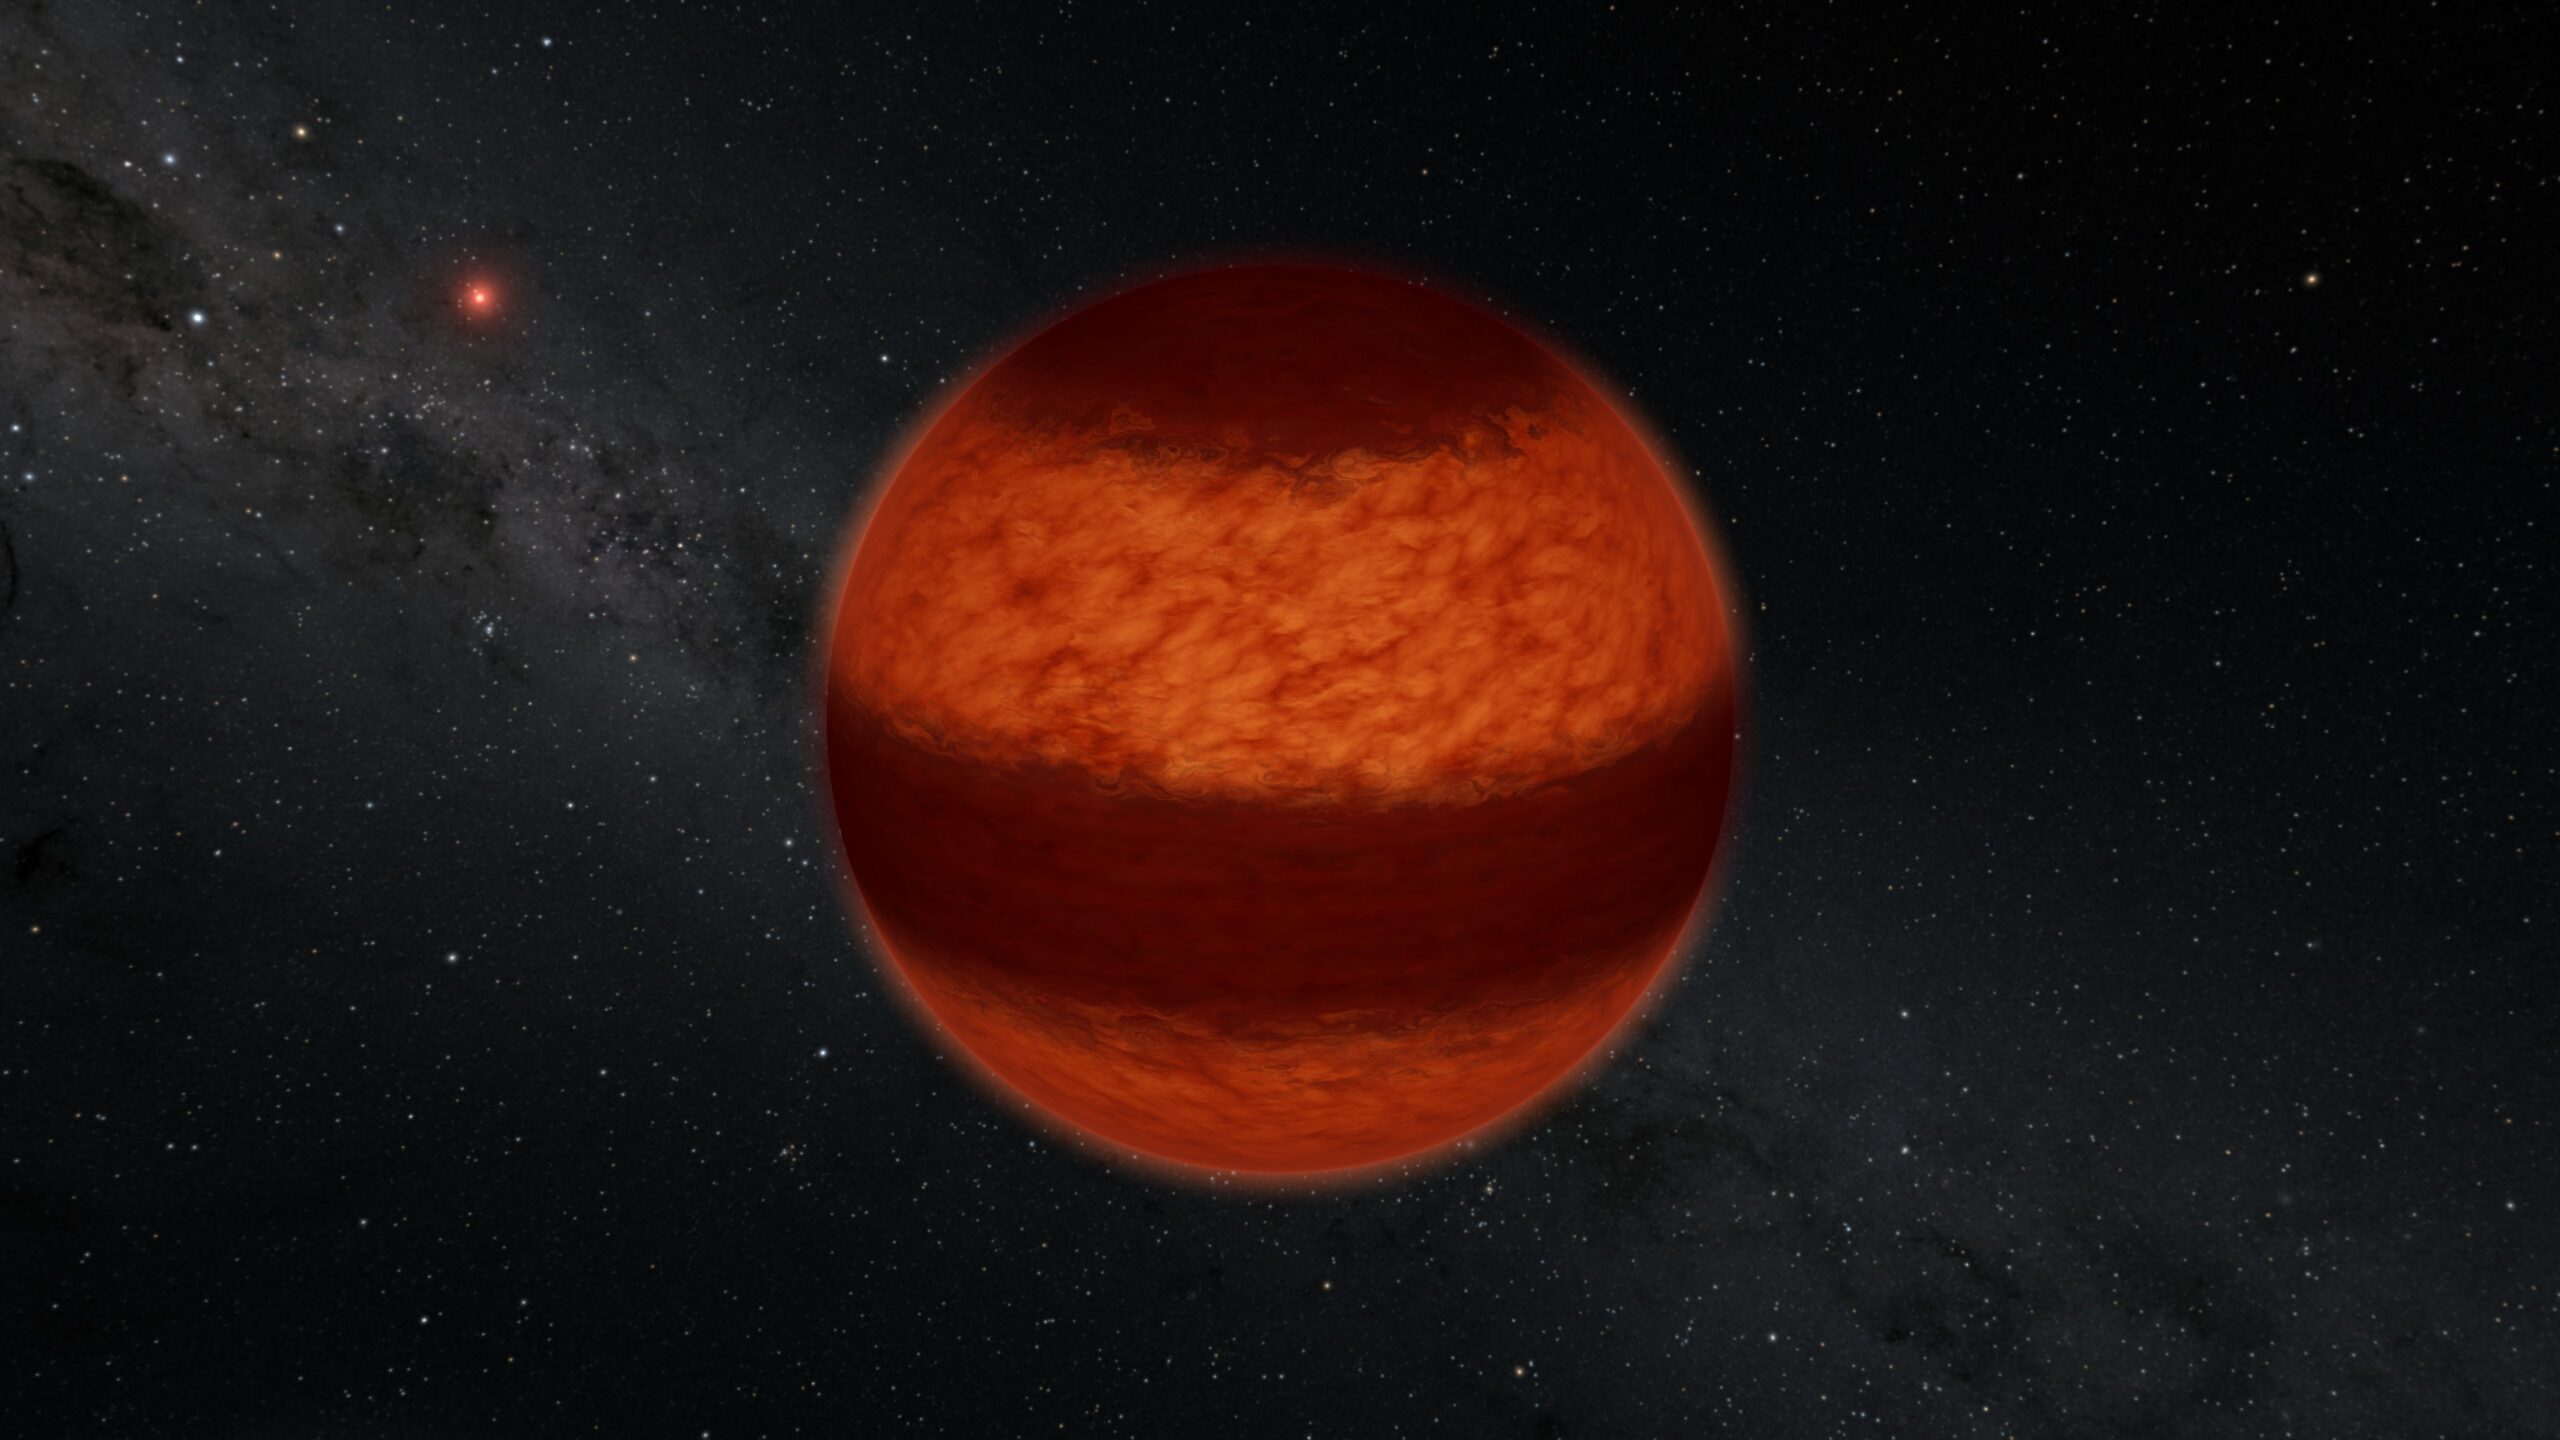 Clouds are found in the atmosphere of a nearby brown dwarf